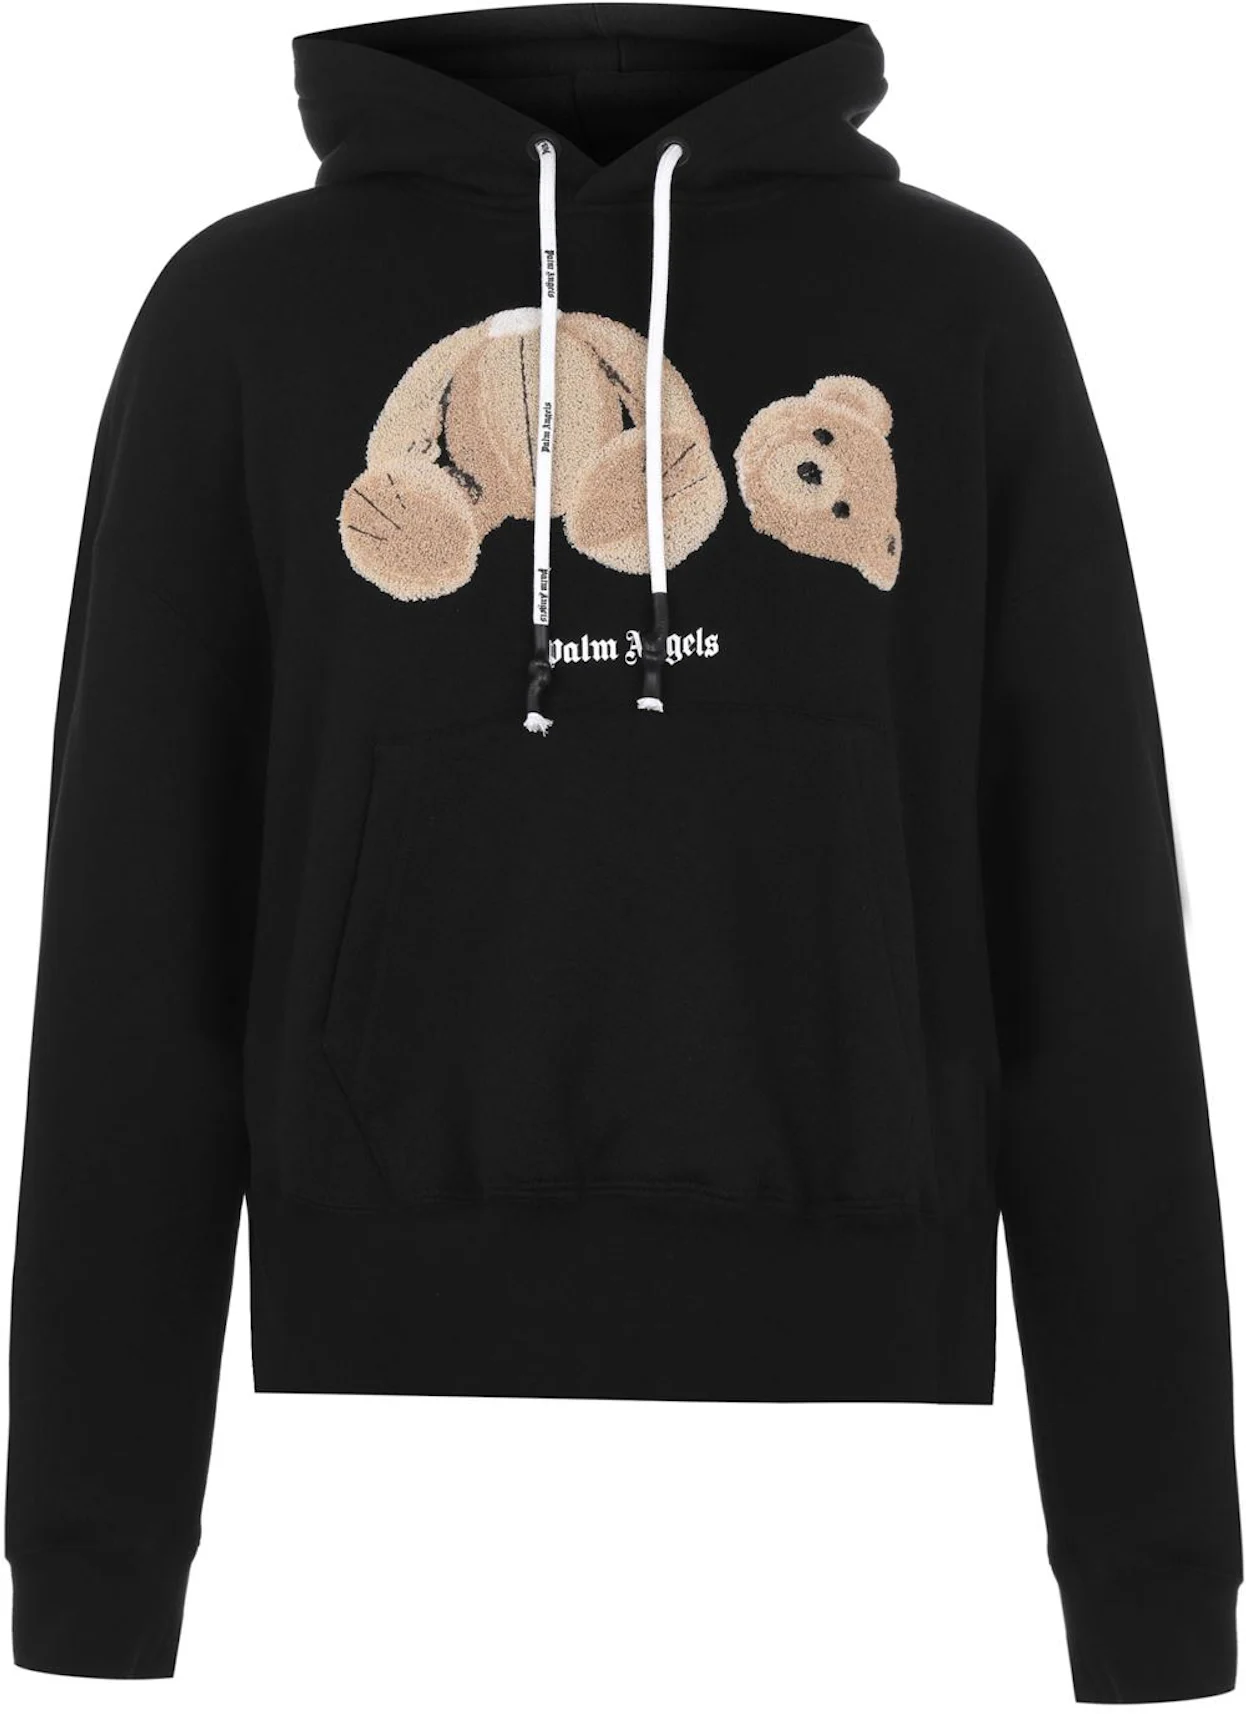 PALM BEAR HOODIE in black - Palm Angels® Official